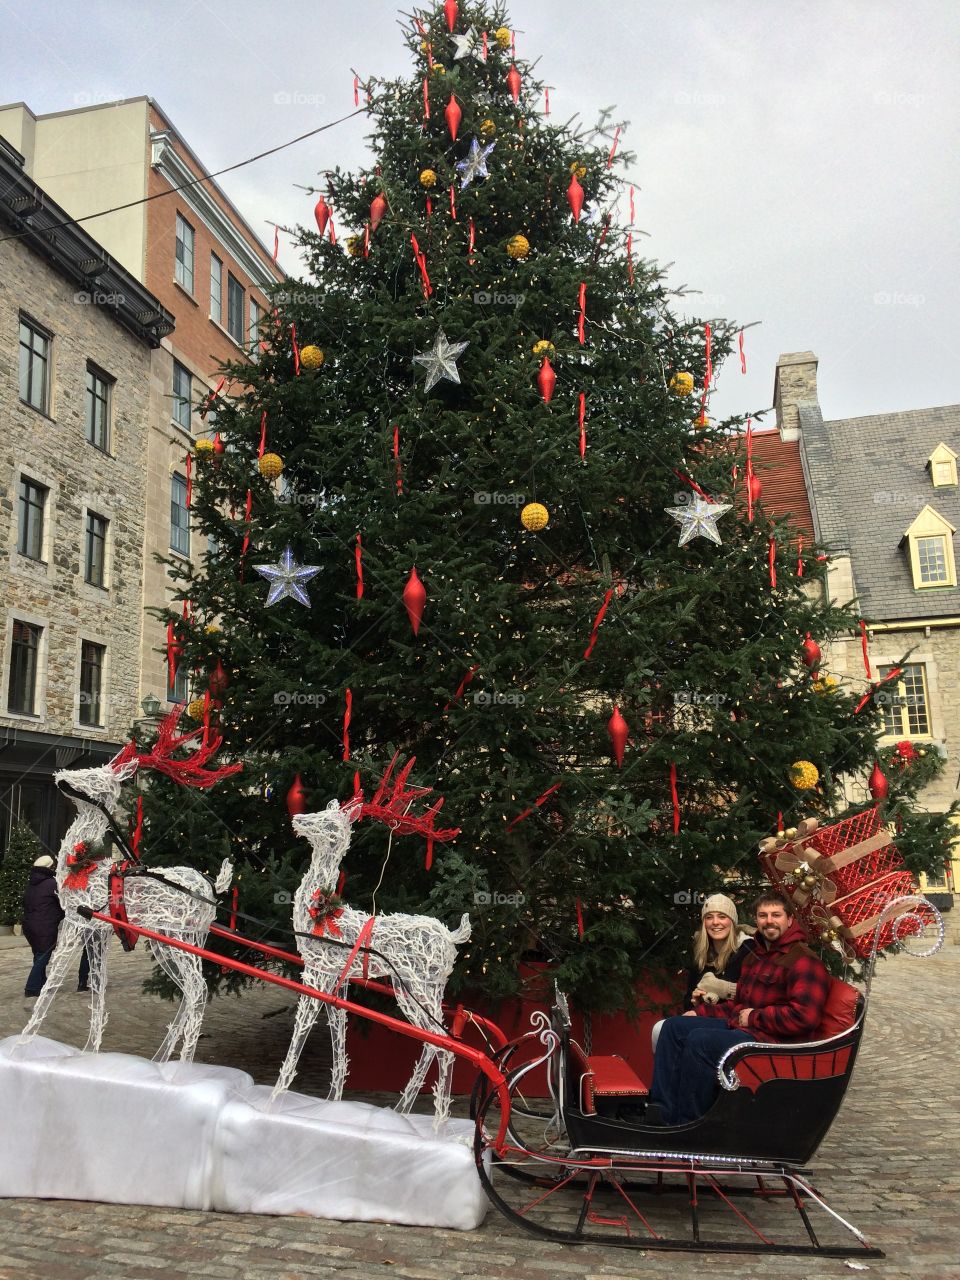 Christmas tree in the town square in Old Town Quebec 